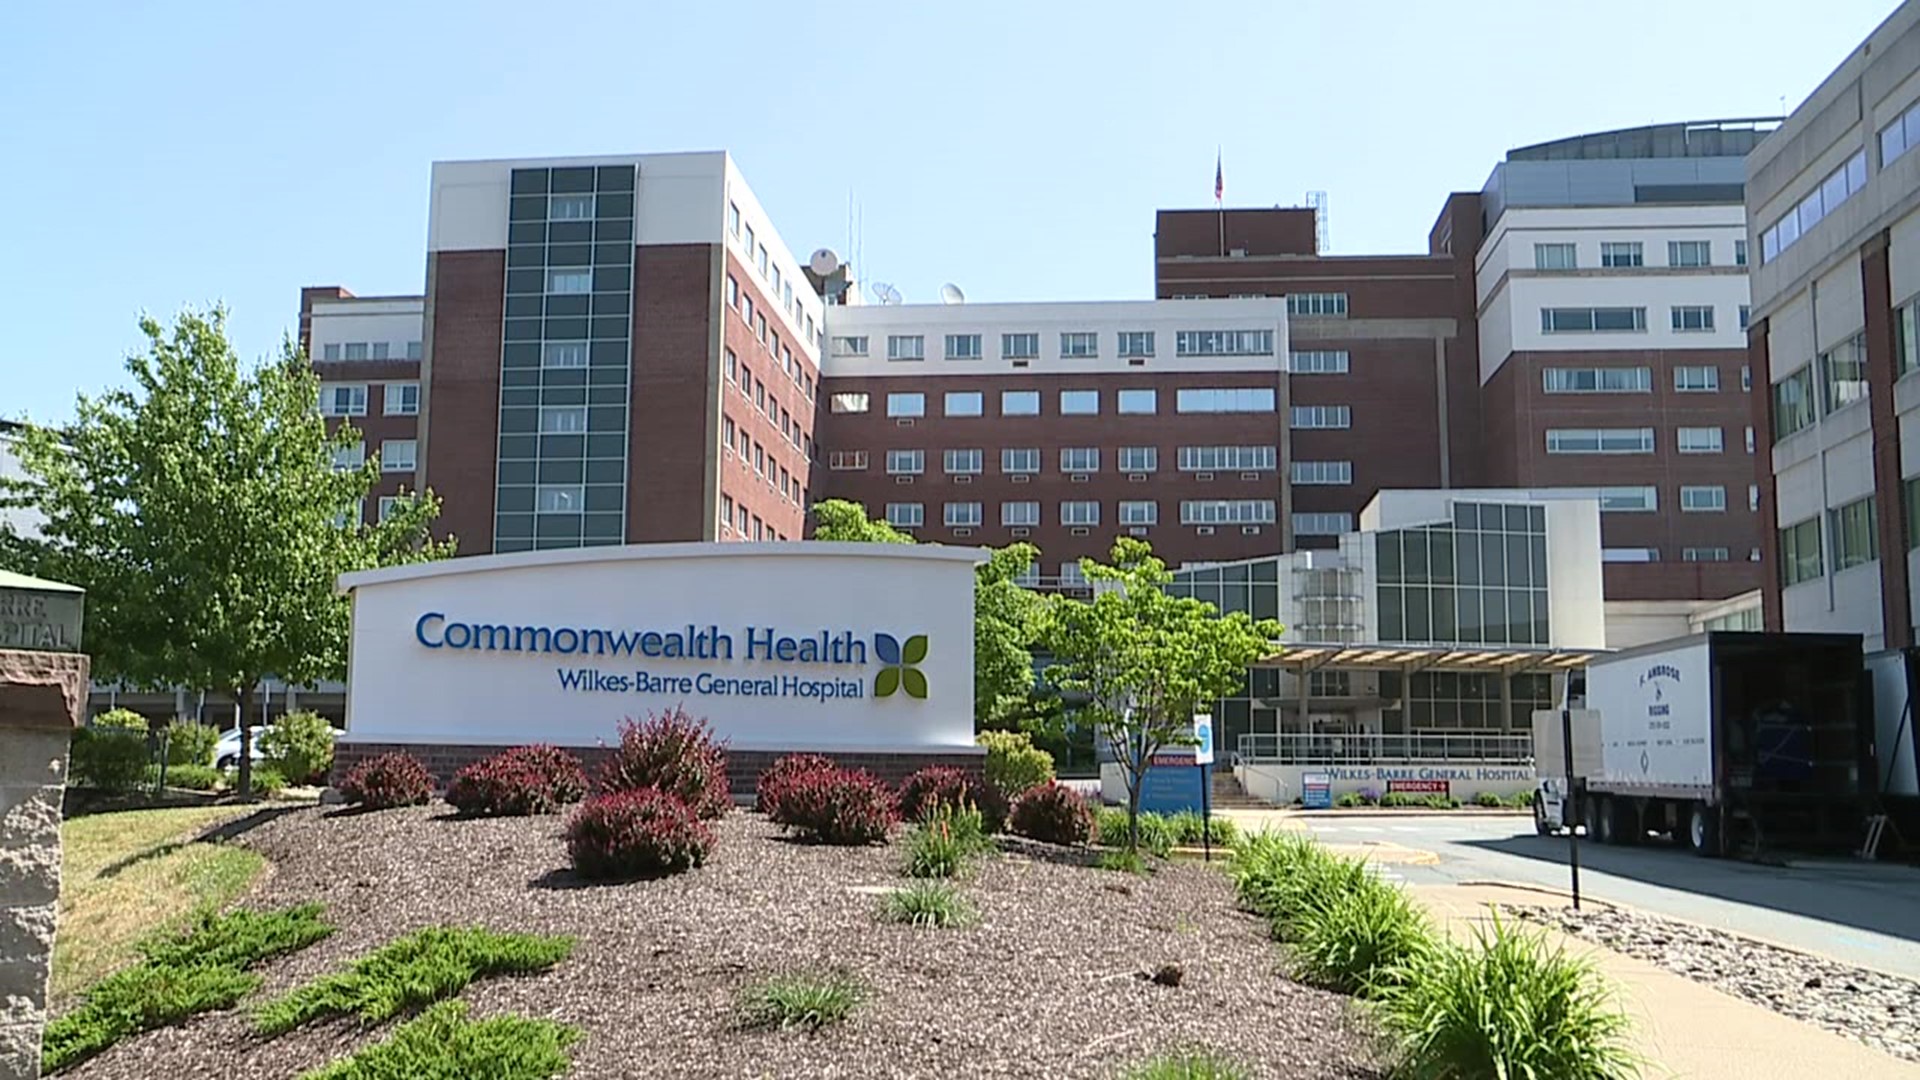 Commonwealth Health announced childbirth outpatient services will end in July.